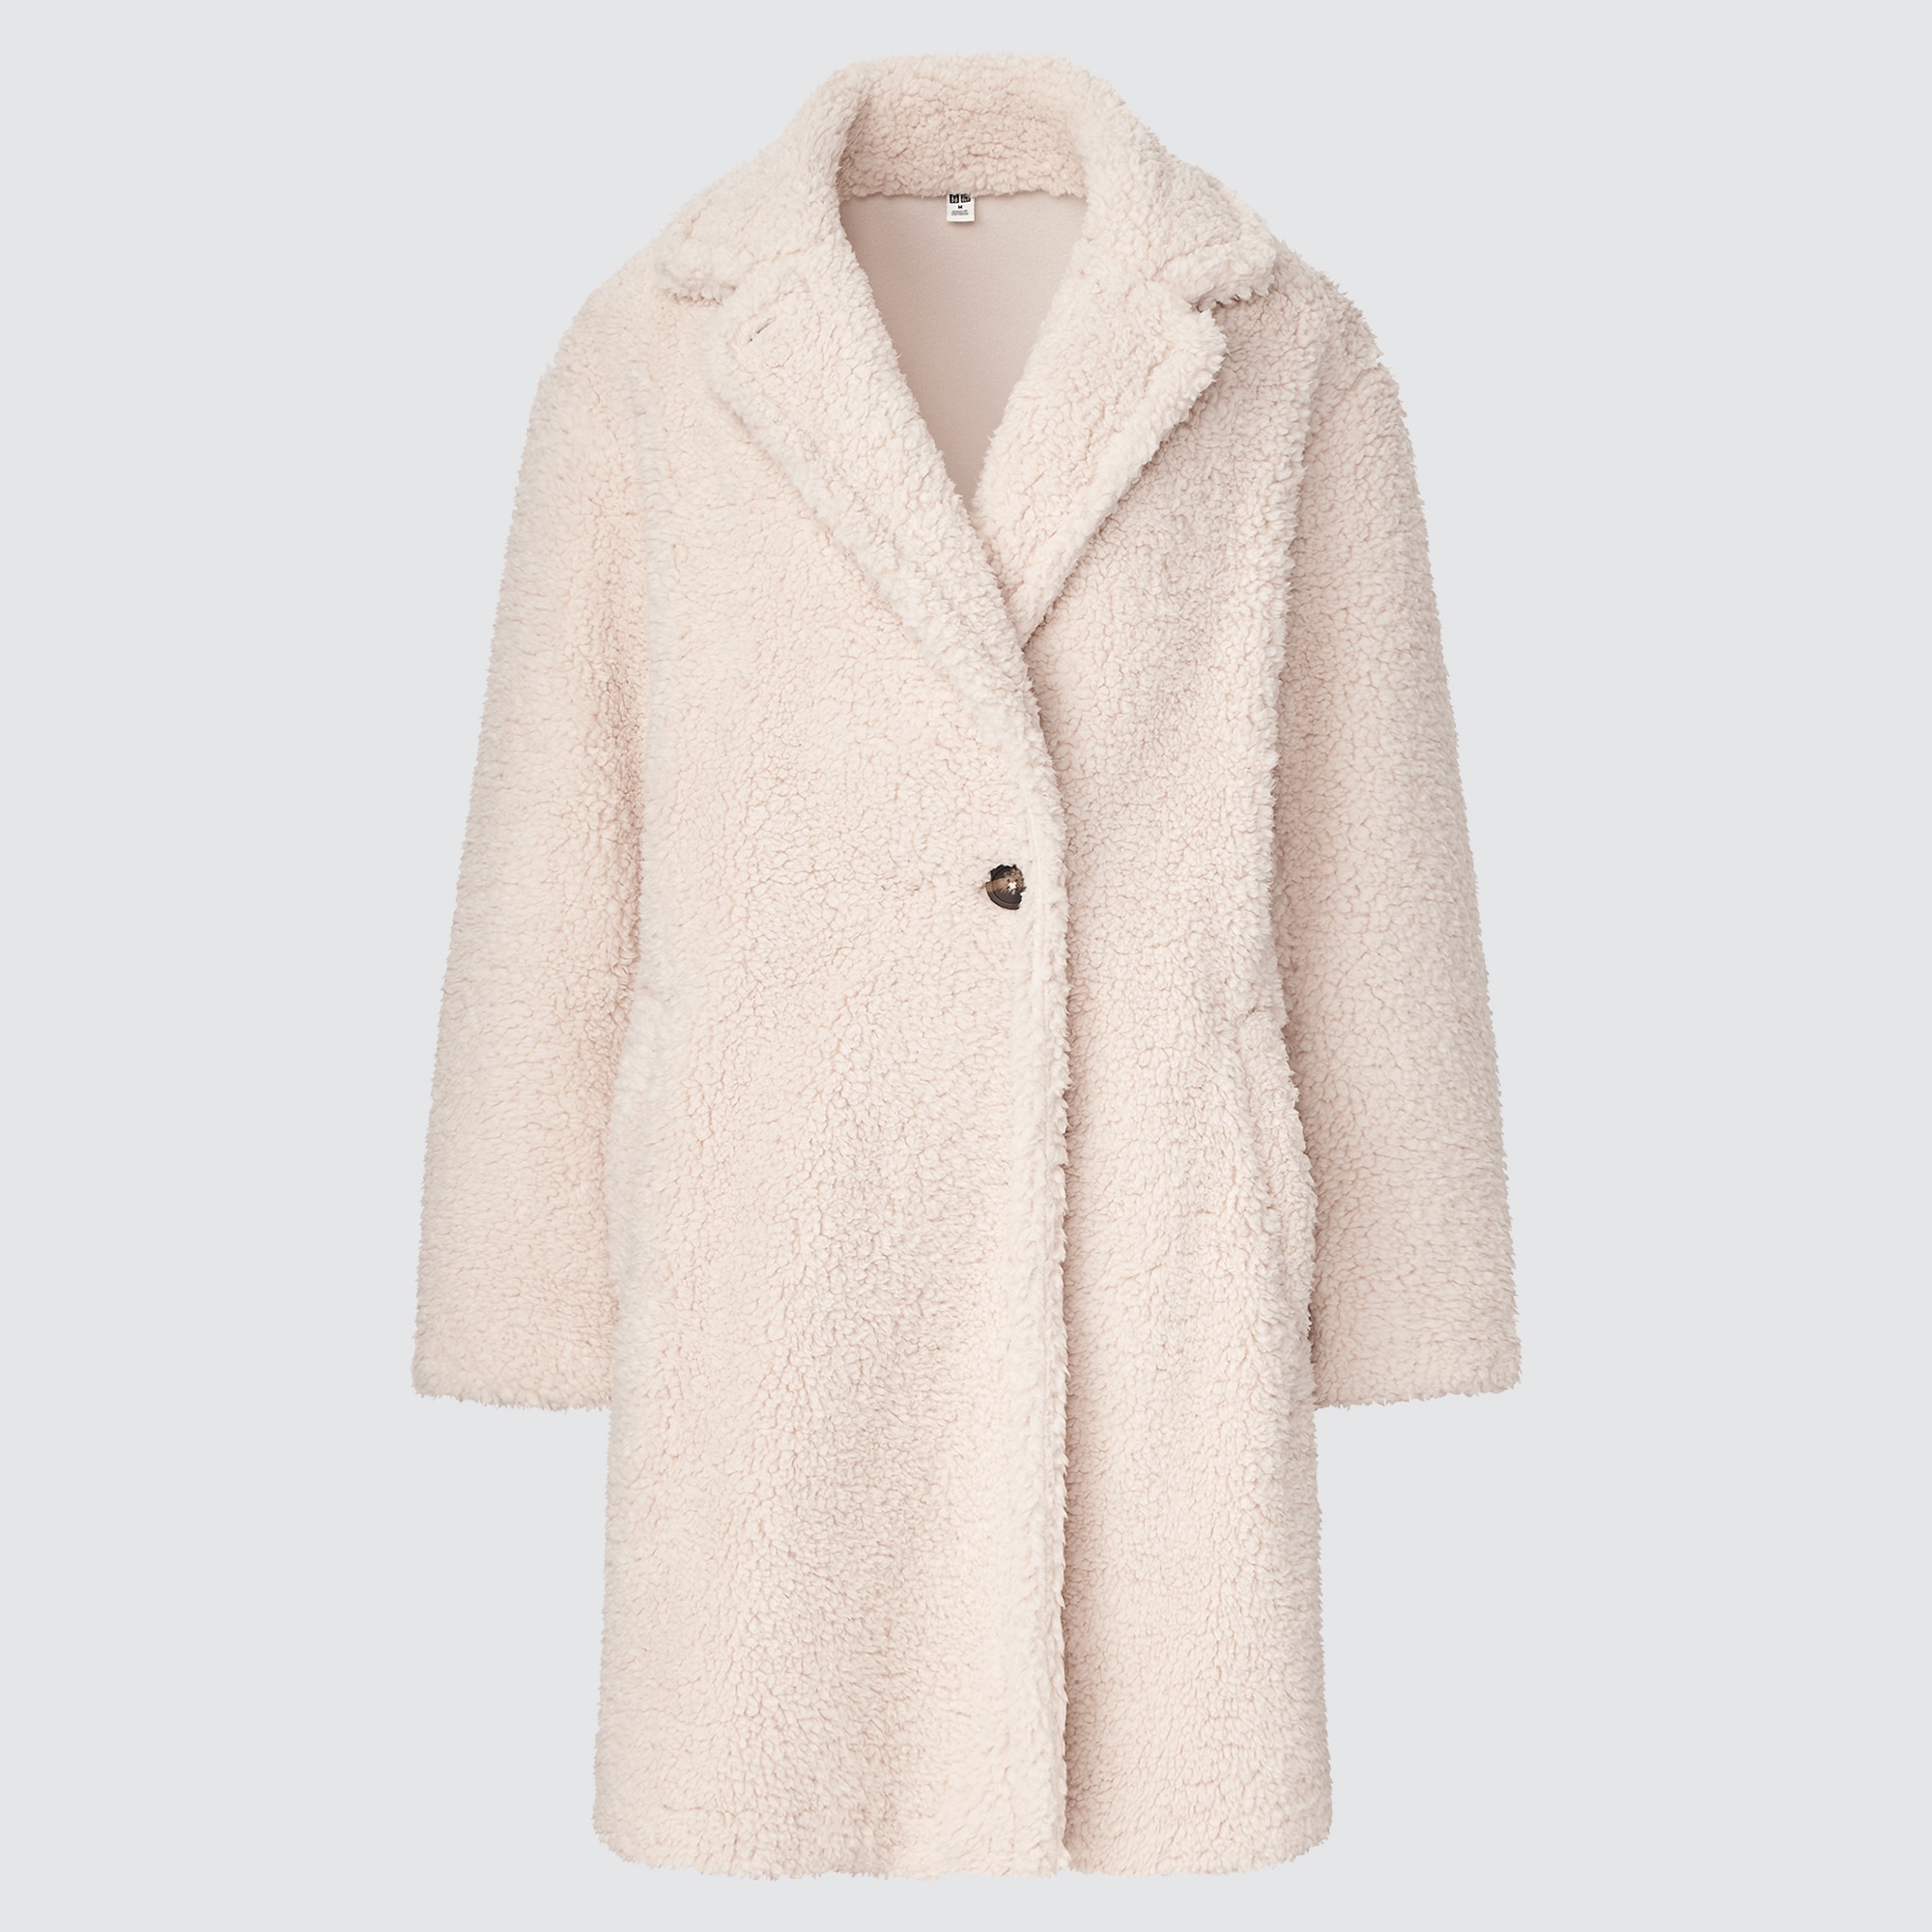 Uniqlo WOMEN PILELINED FLEECE TAILORED COAT Womens Fashion Coats  Jackets and Outerwear on Carousell